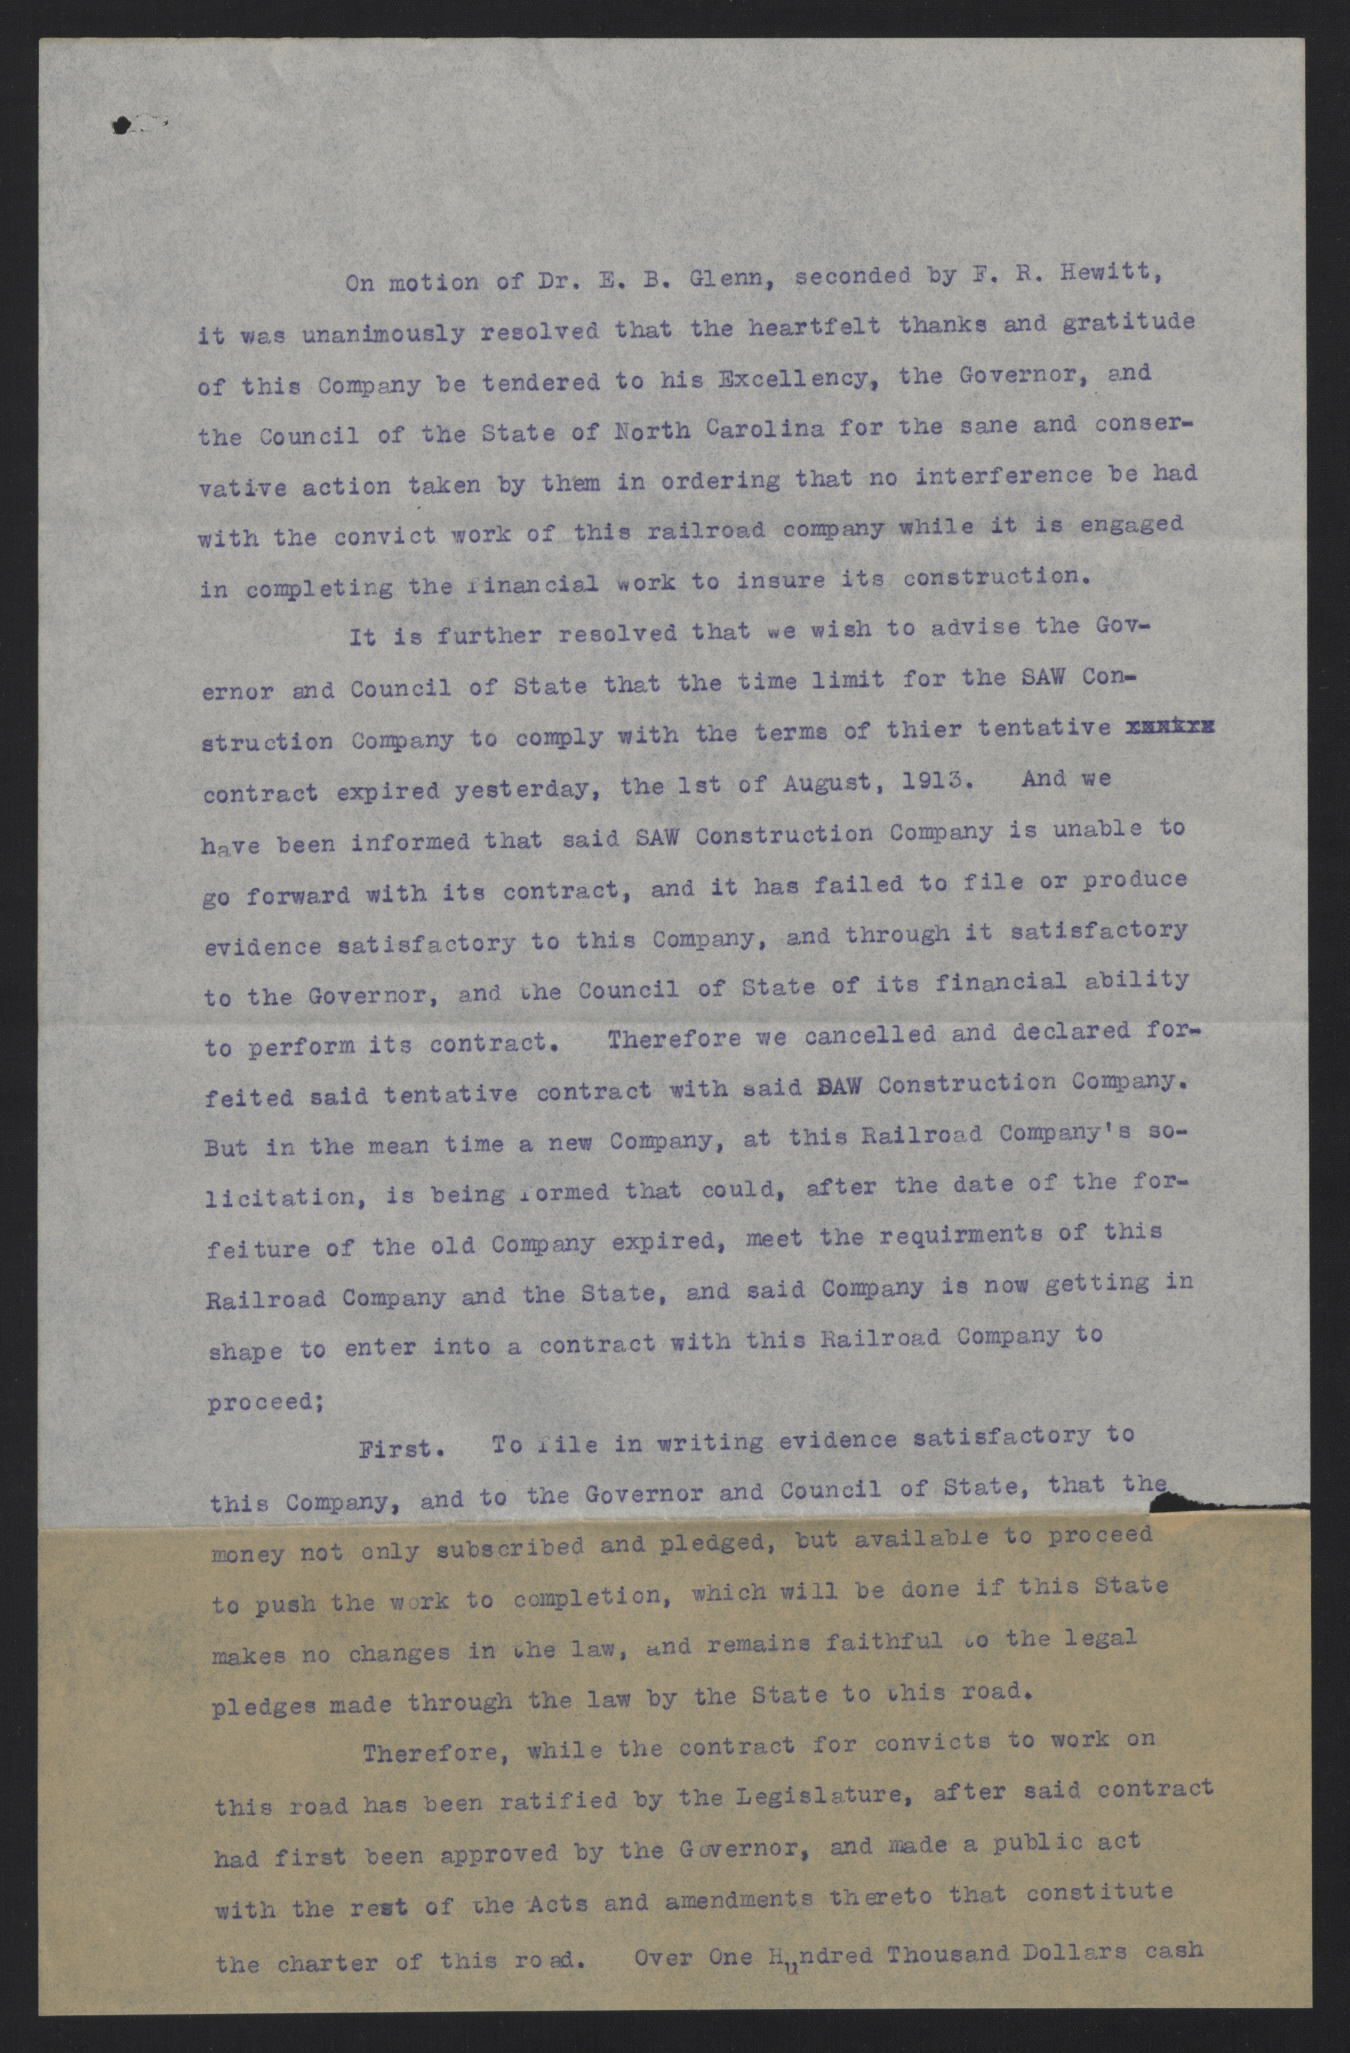 Resolution of the South Atlantic and Western Railway Company, August 2, 1913, page 1